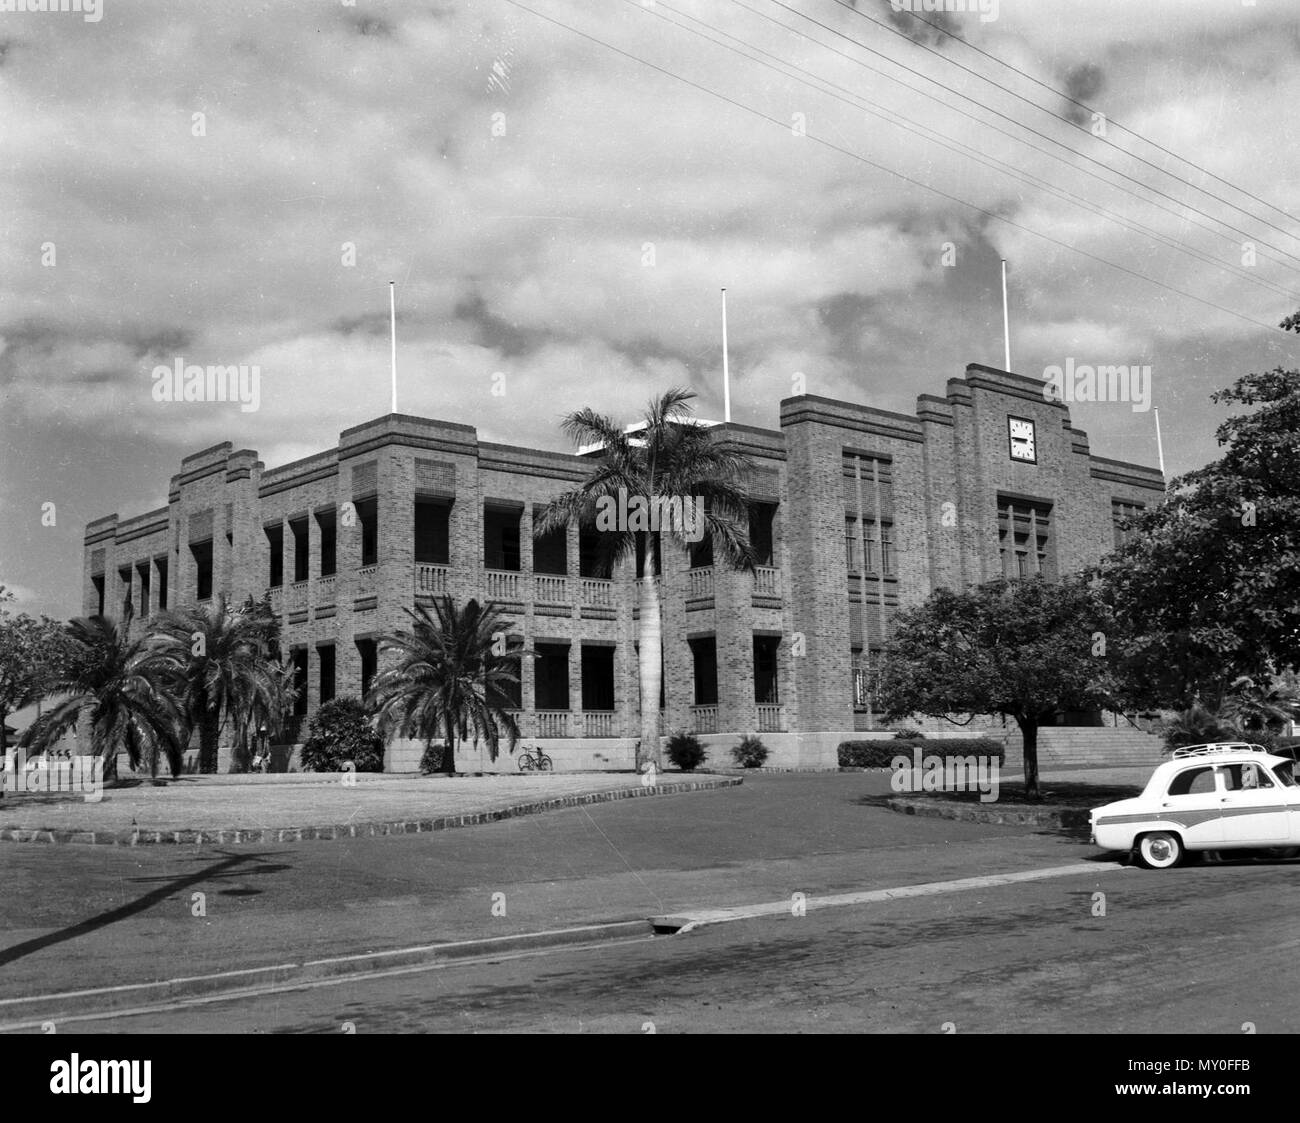 Town Hall, Rockhampton, c 1962. From the Queensland Heritage Registerid=601572 ) .  Rockhampton emerged as an important Queensland regional centre during the 1850s and 1860s. This development took on especial prominence after the discovery of the mining wealth at Mount Morgan in 1882. The additional affluence that flowed on for Rockhampton fuelled a rapid expansion of public and private buildings and residences throughout the City and surrounds. This building boom allowed for many grand places to be constructed, especially renowned along the commercial and government sector near the wharves on Stock Photo